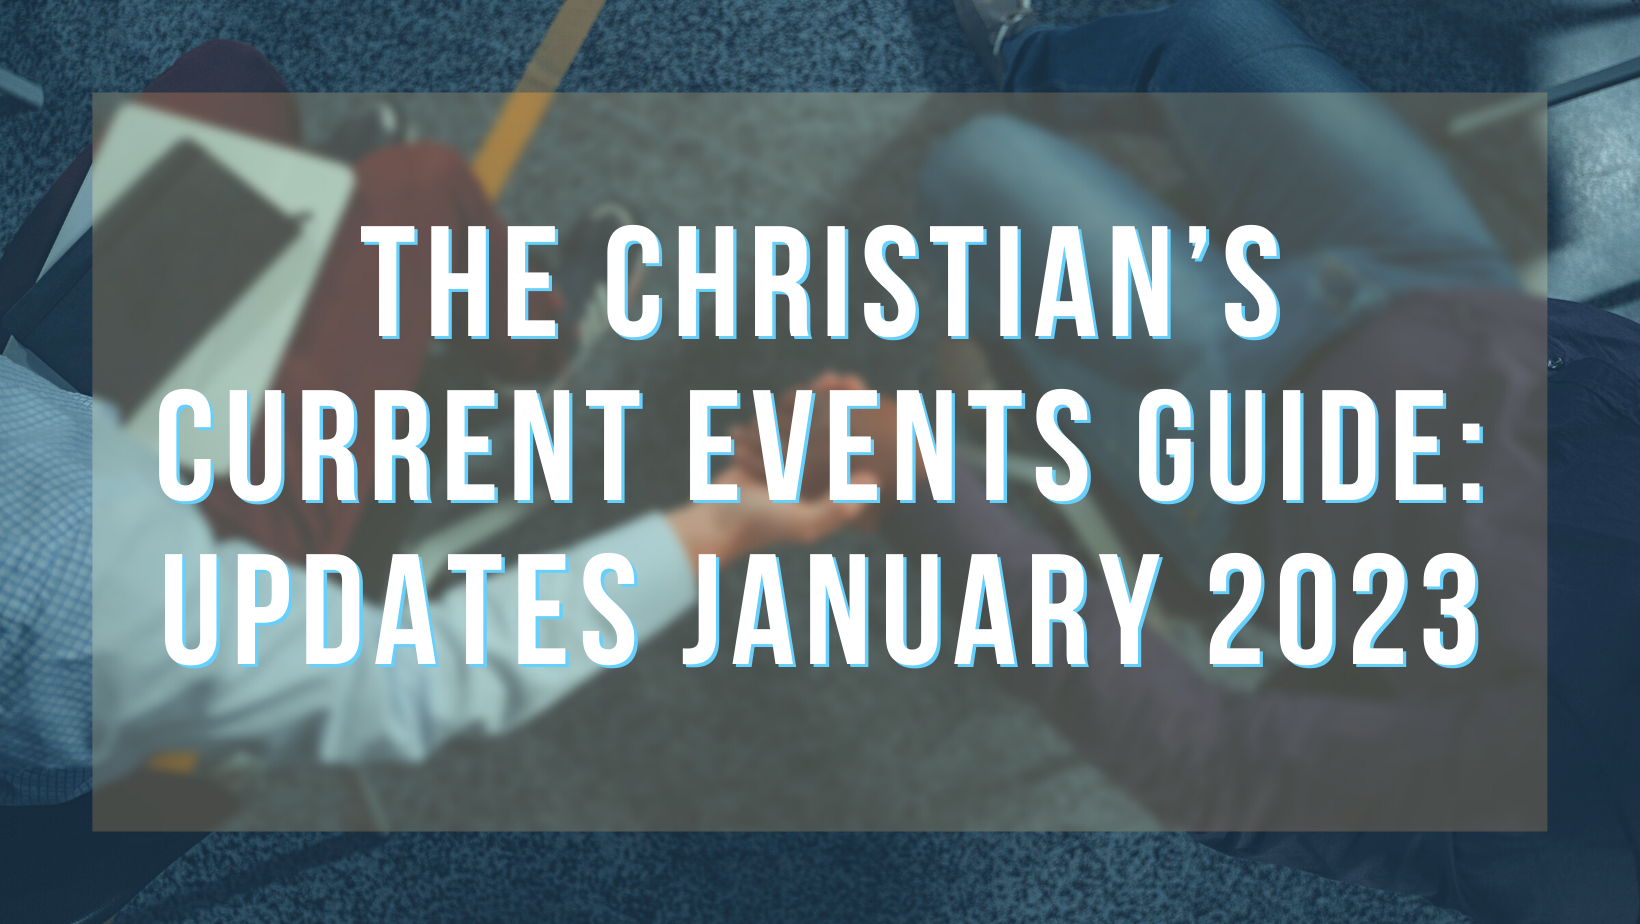 The Christian’s Current Events Guide: Updates January 2023